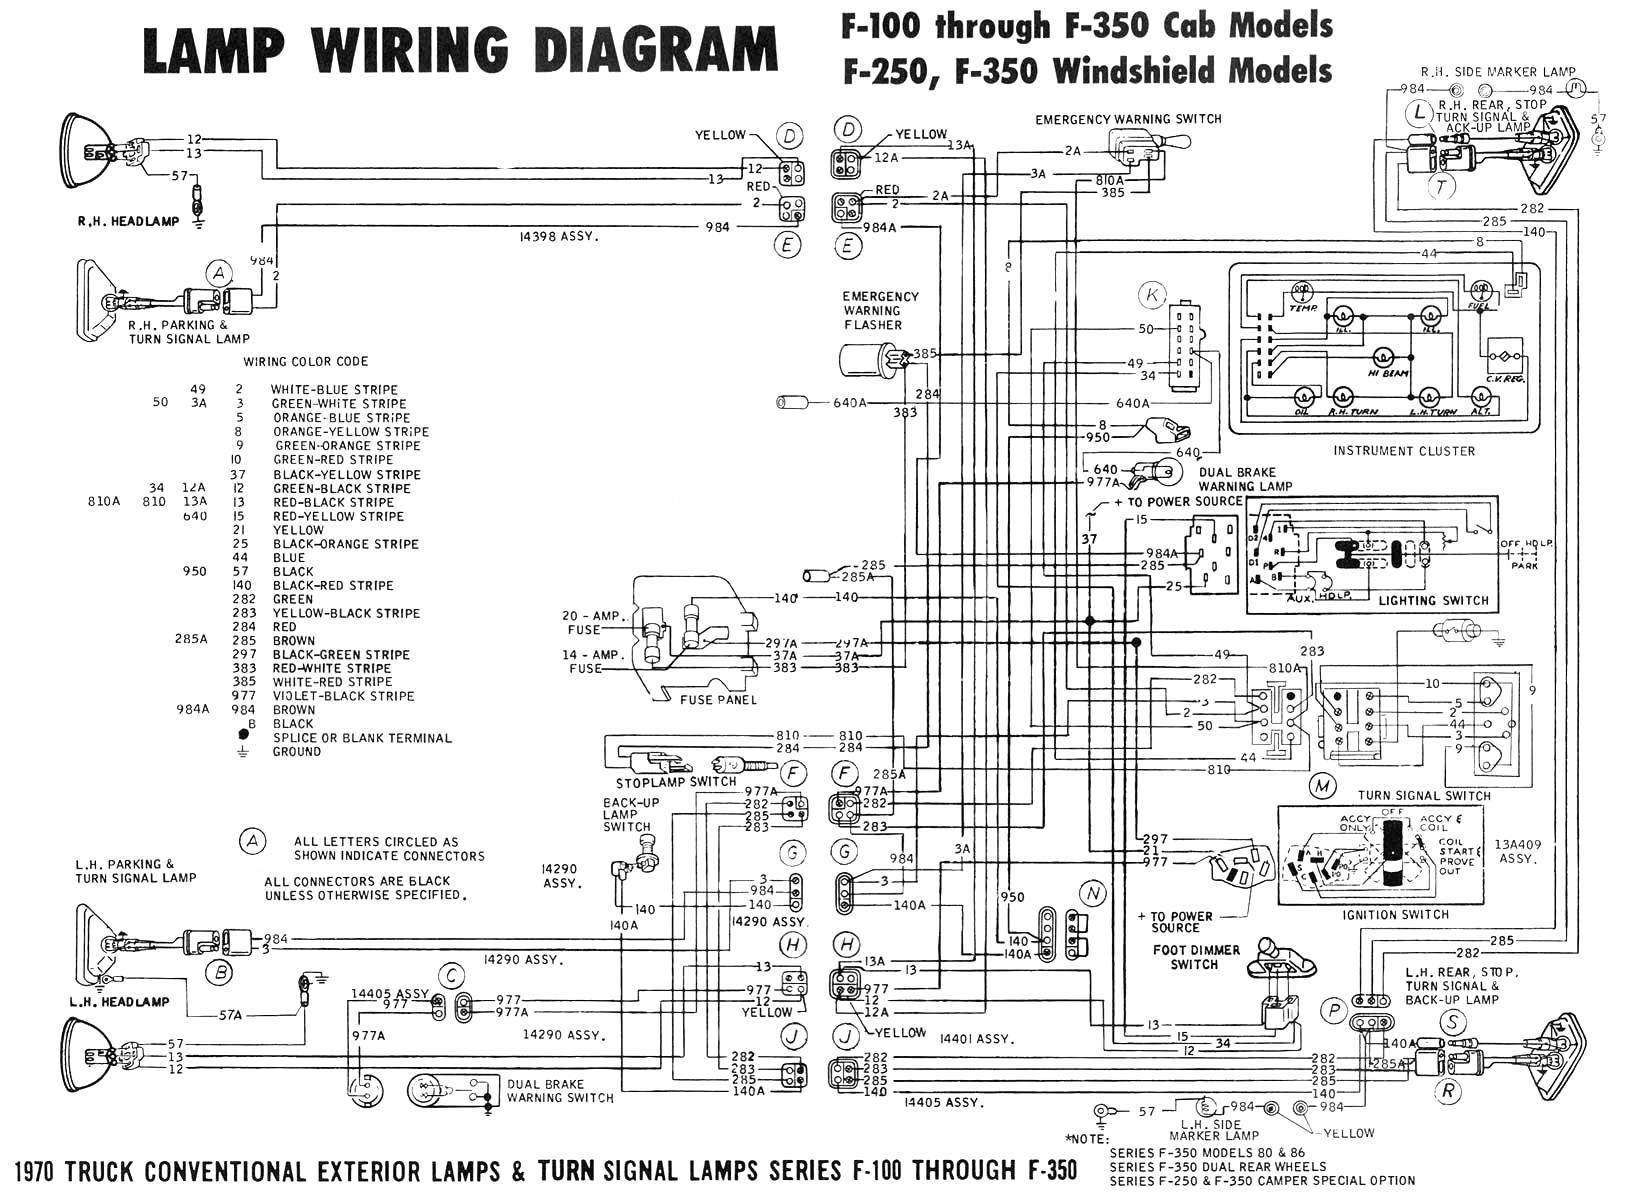 wiring diagrams ceiling fan and light kit lzk gallery wiring plymouth navigation wiring diagram